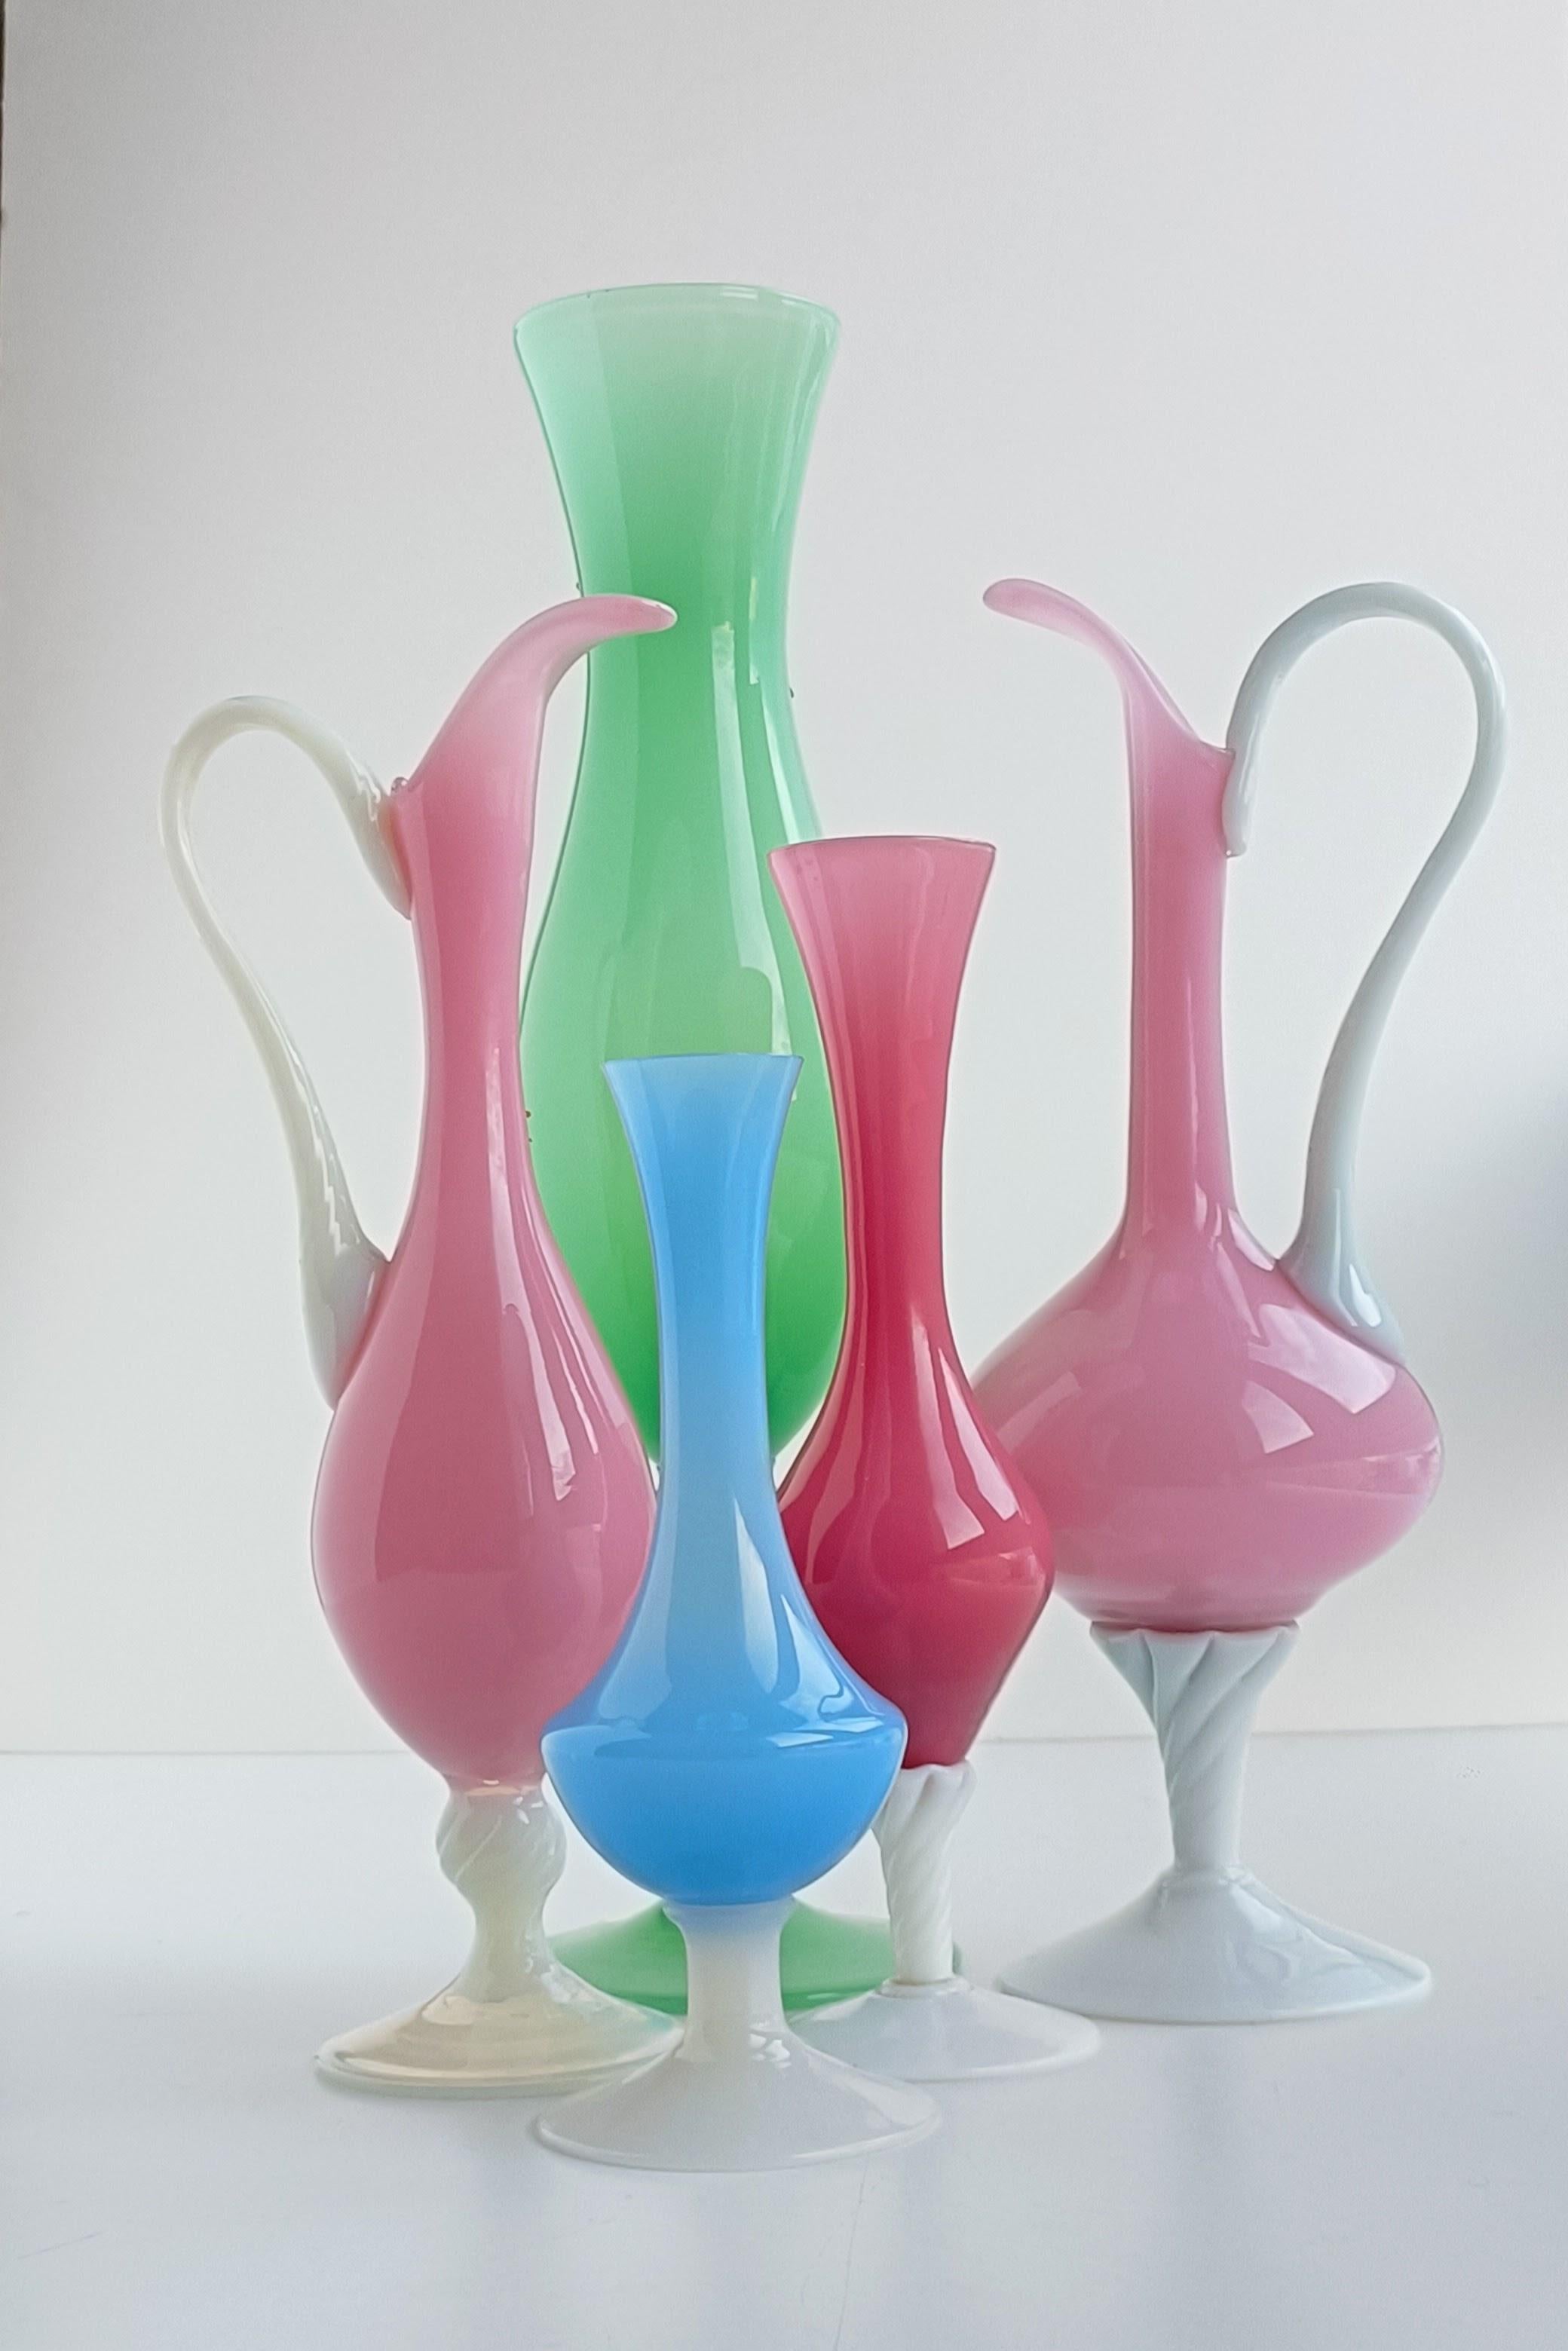 Italian Empoli Glass Opaline Florence Set of Vases, Italy, 1950s.  For Sale